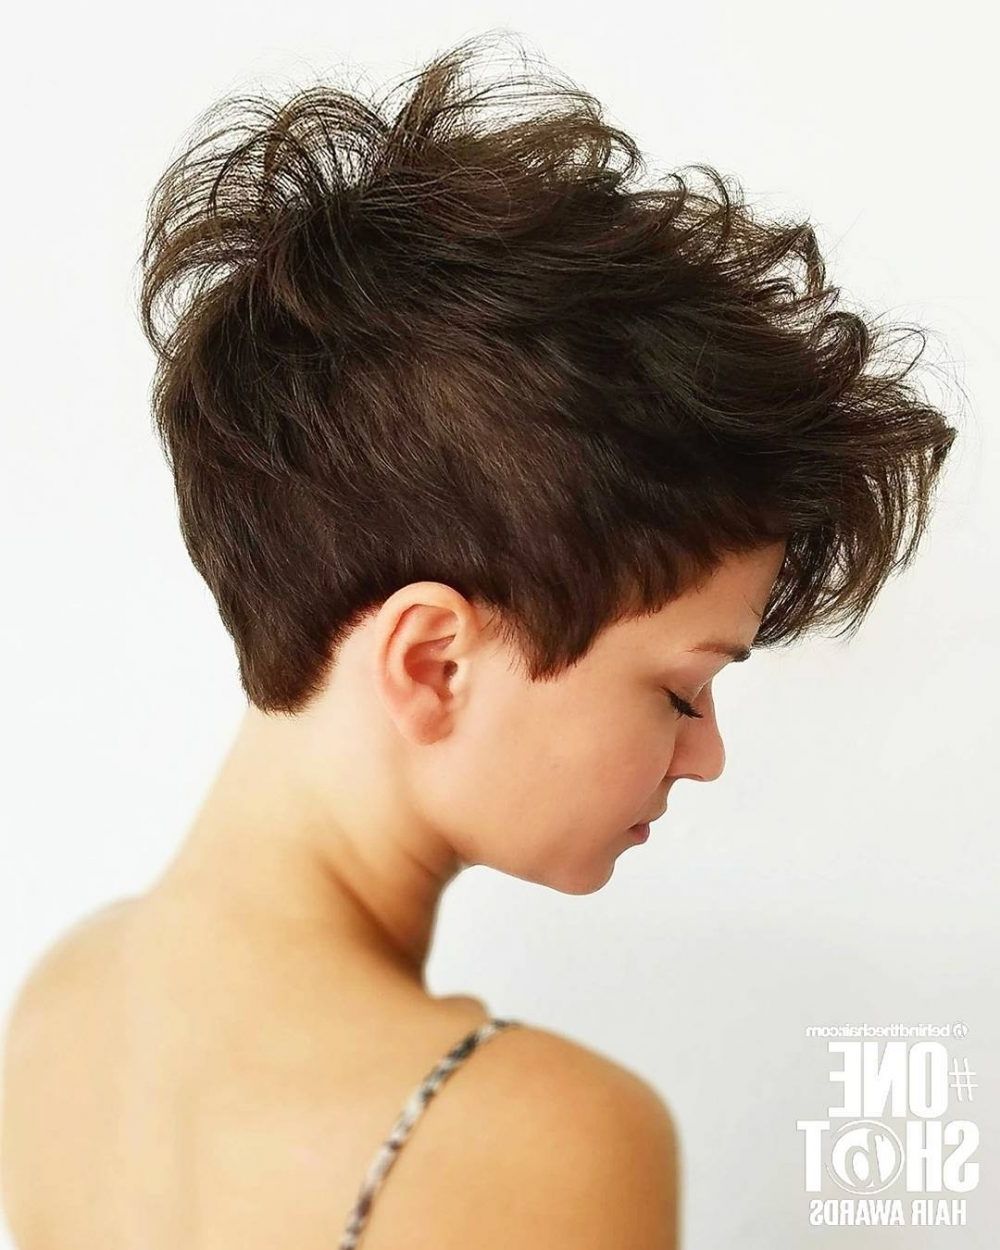 47 Popular Short Choppy Hairstyles For 2018 With Regard To Most Recent Choppy Asymmetrical Black Pixie Haircuts (View 6 of 15)